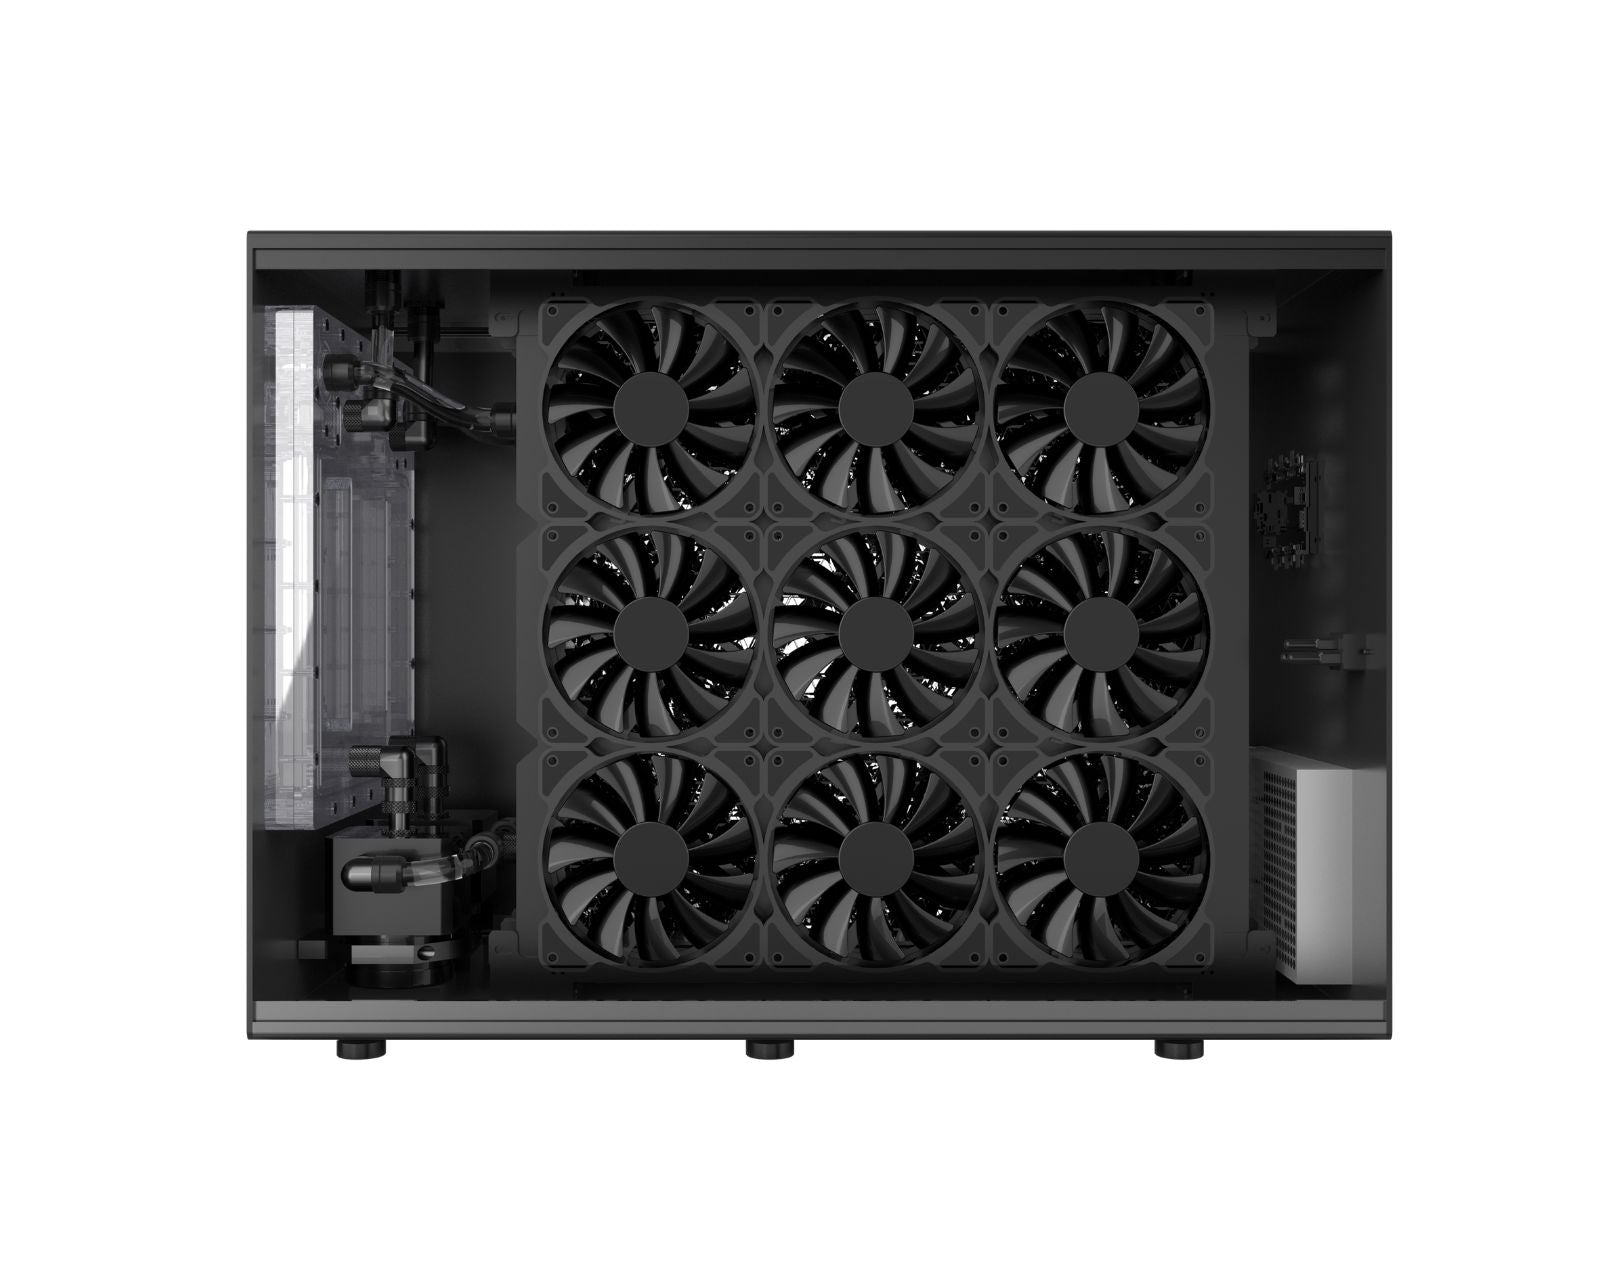 Bykski B-1080X2-CEC-X Elite Thermal Exchange System with Integrated Twin Pump Distro, Dual 1080mm Radiators with 18 PWM 120mm Fans